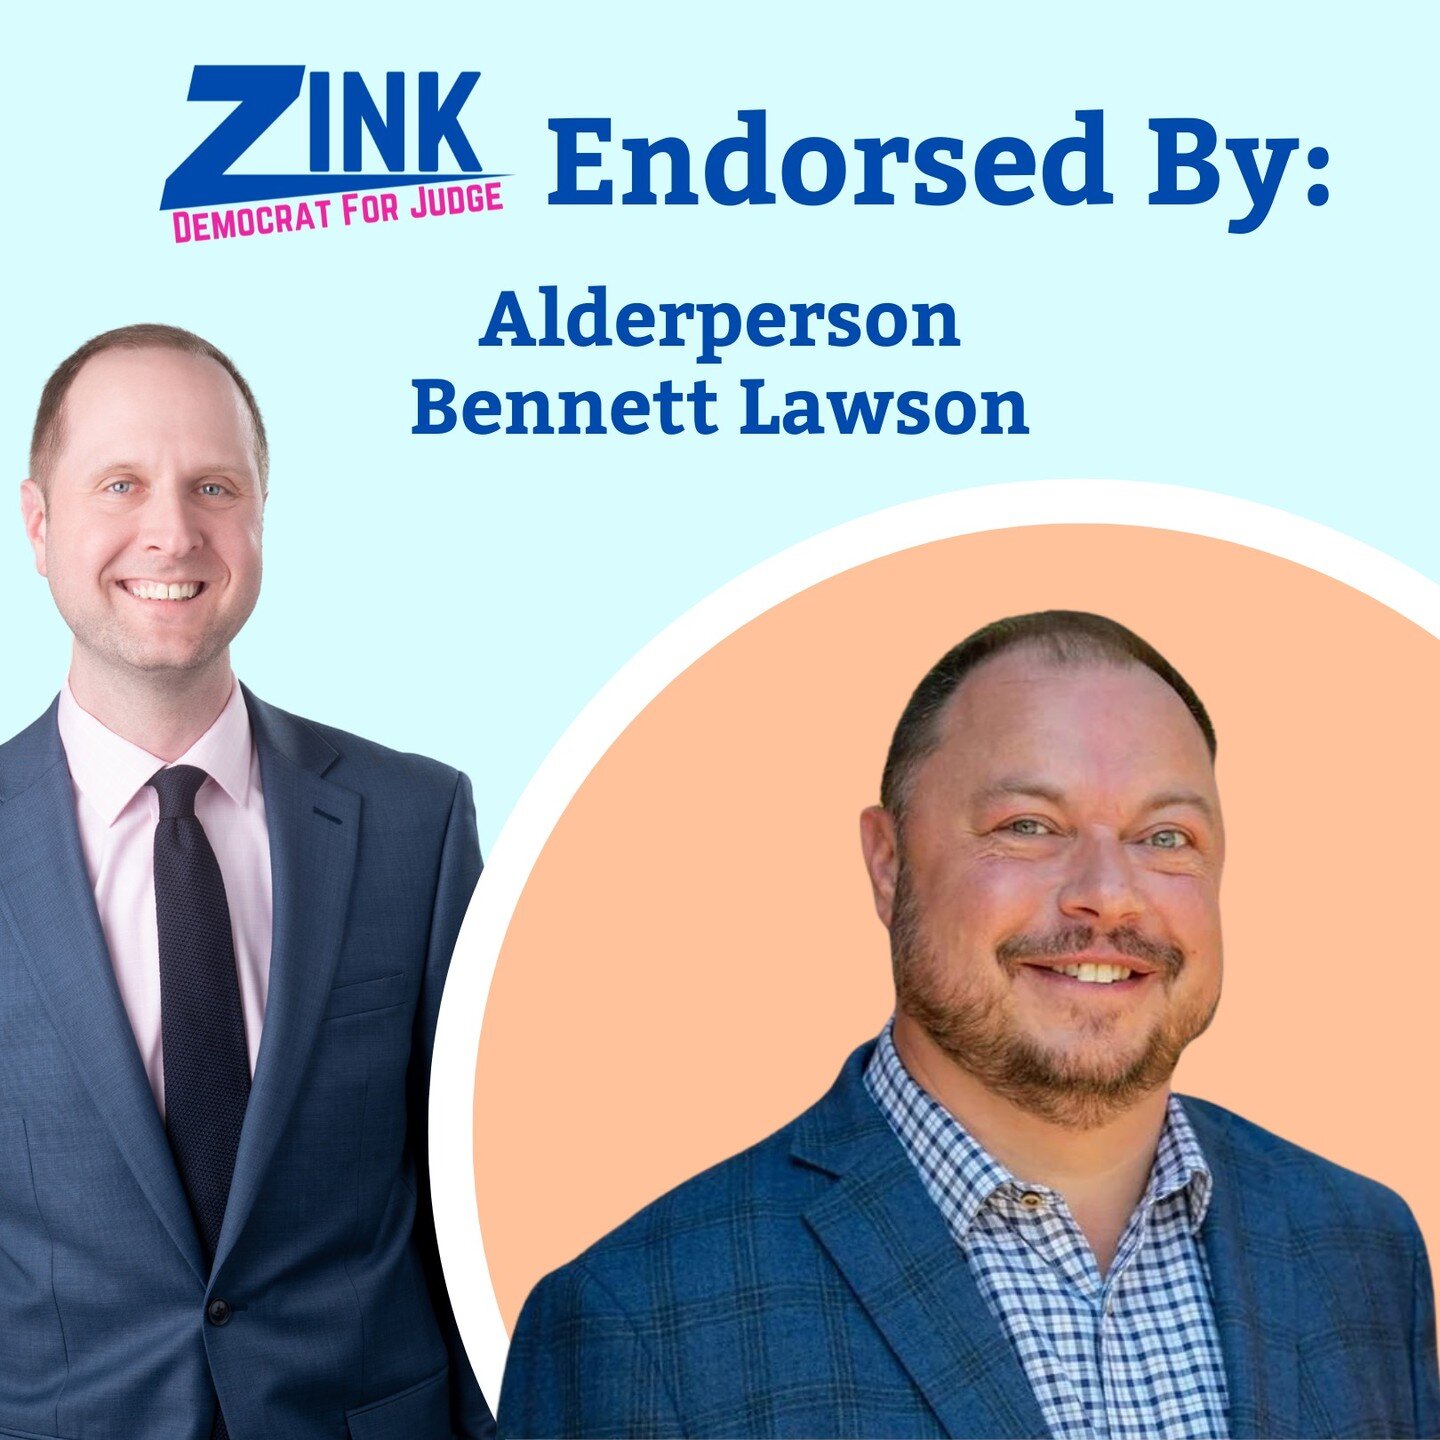 🚨Endorsement Announcement🚨

I can't find the words to express how thankful I am to Alderman Lawson not only for his endorsement, but also for his friendship. Bennett has offered invaluable support and I'm proud to have him by my side on this journe